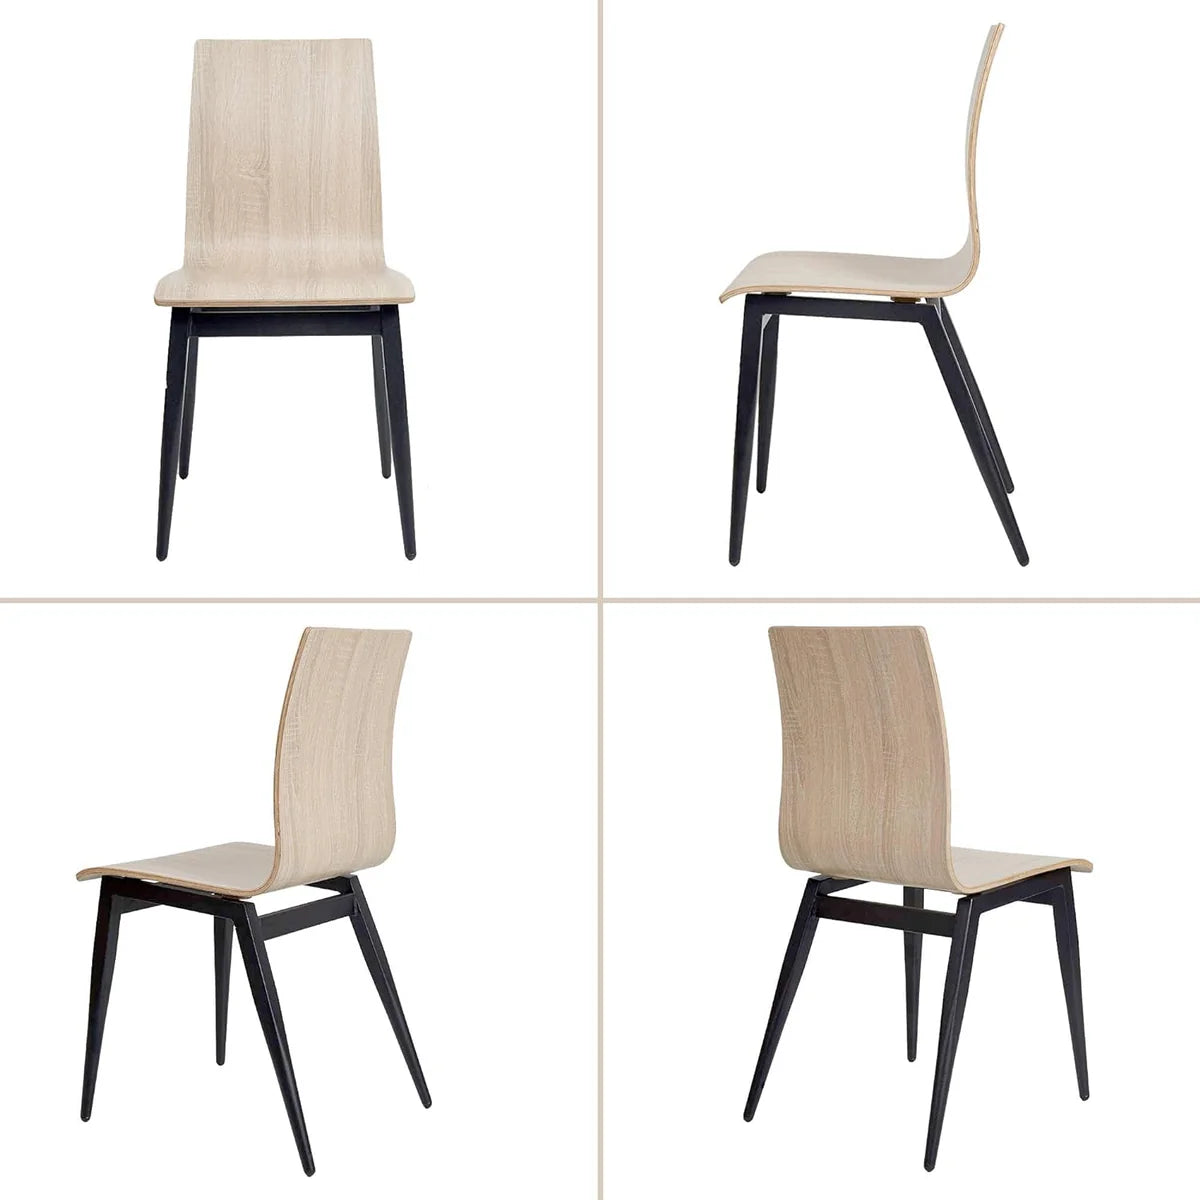 Set of 2 Modern Kitchen Chairs with Wooden Seat and Metal Legs Dining Side Chair, light Brown